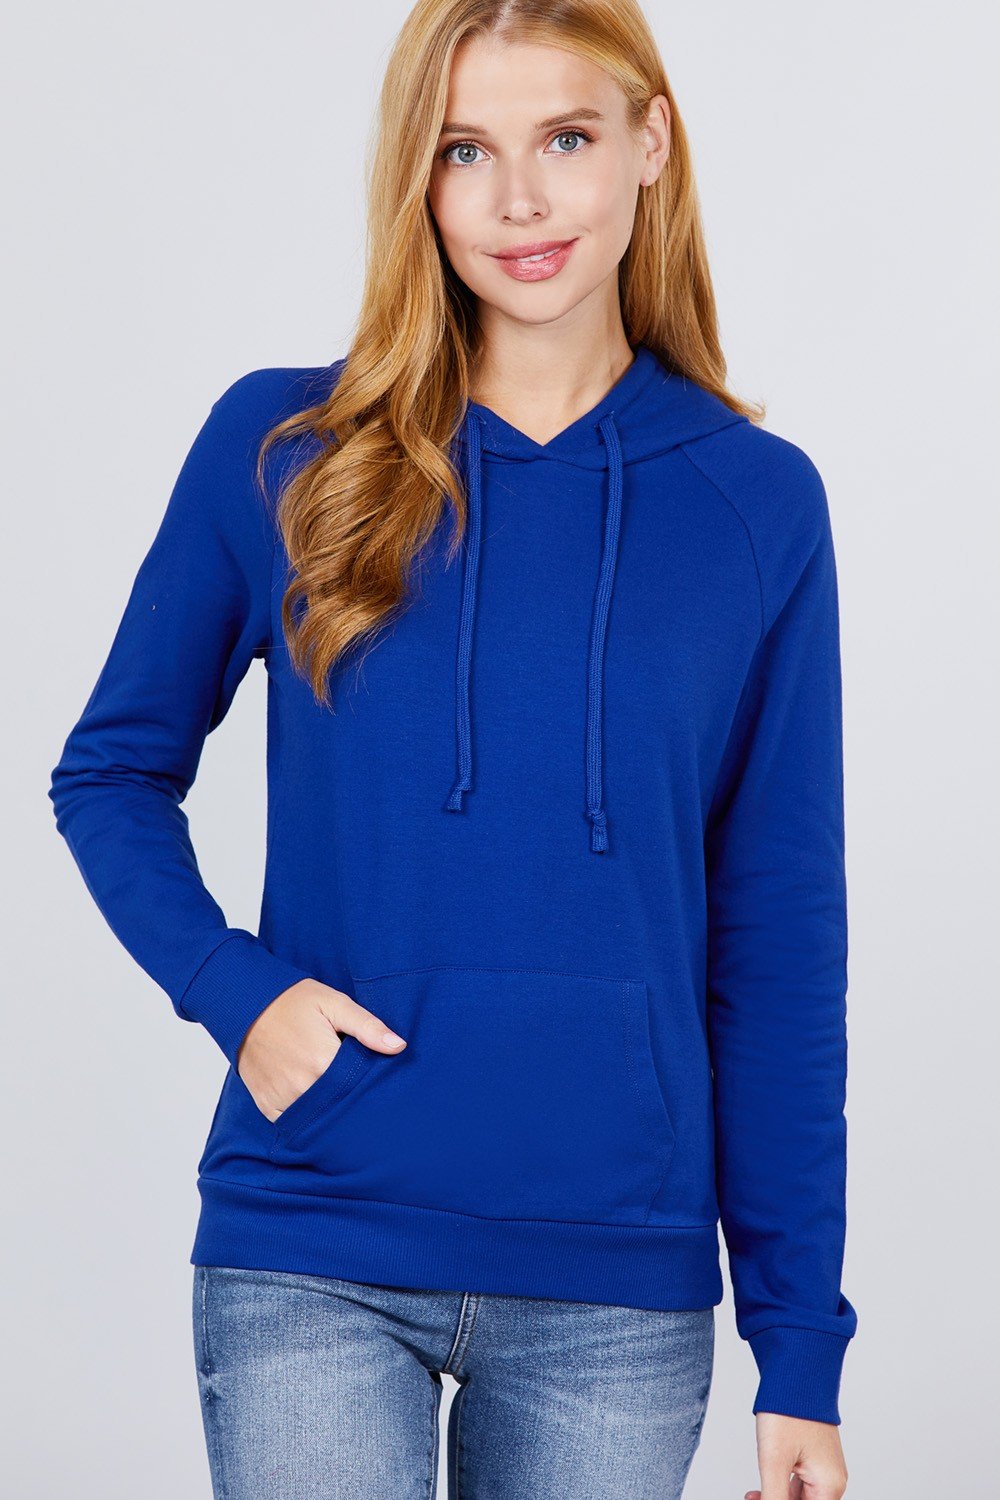 French Terry Pullover Hoodie French Terry Pullover Hoodie - M&R CORNER M&R CORNER